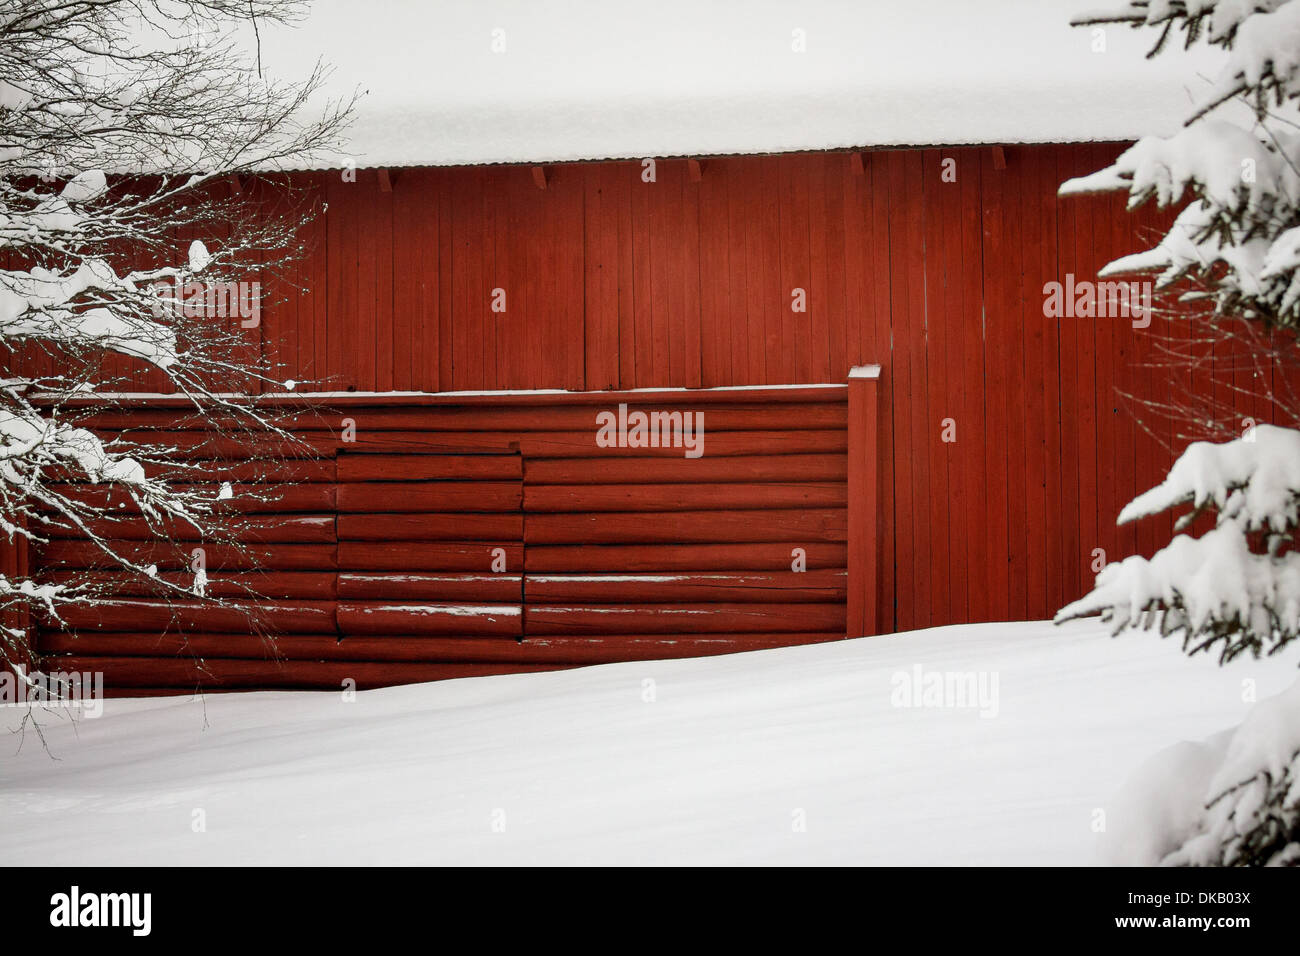 Red wooden barn wall, in colorful contrast with the white snow on the roof and on the ground. Stock Photo